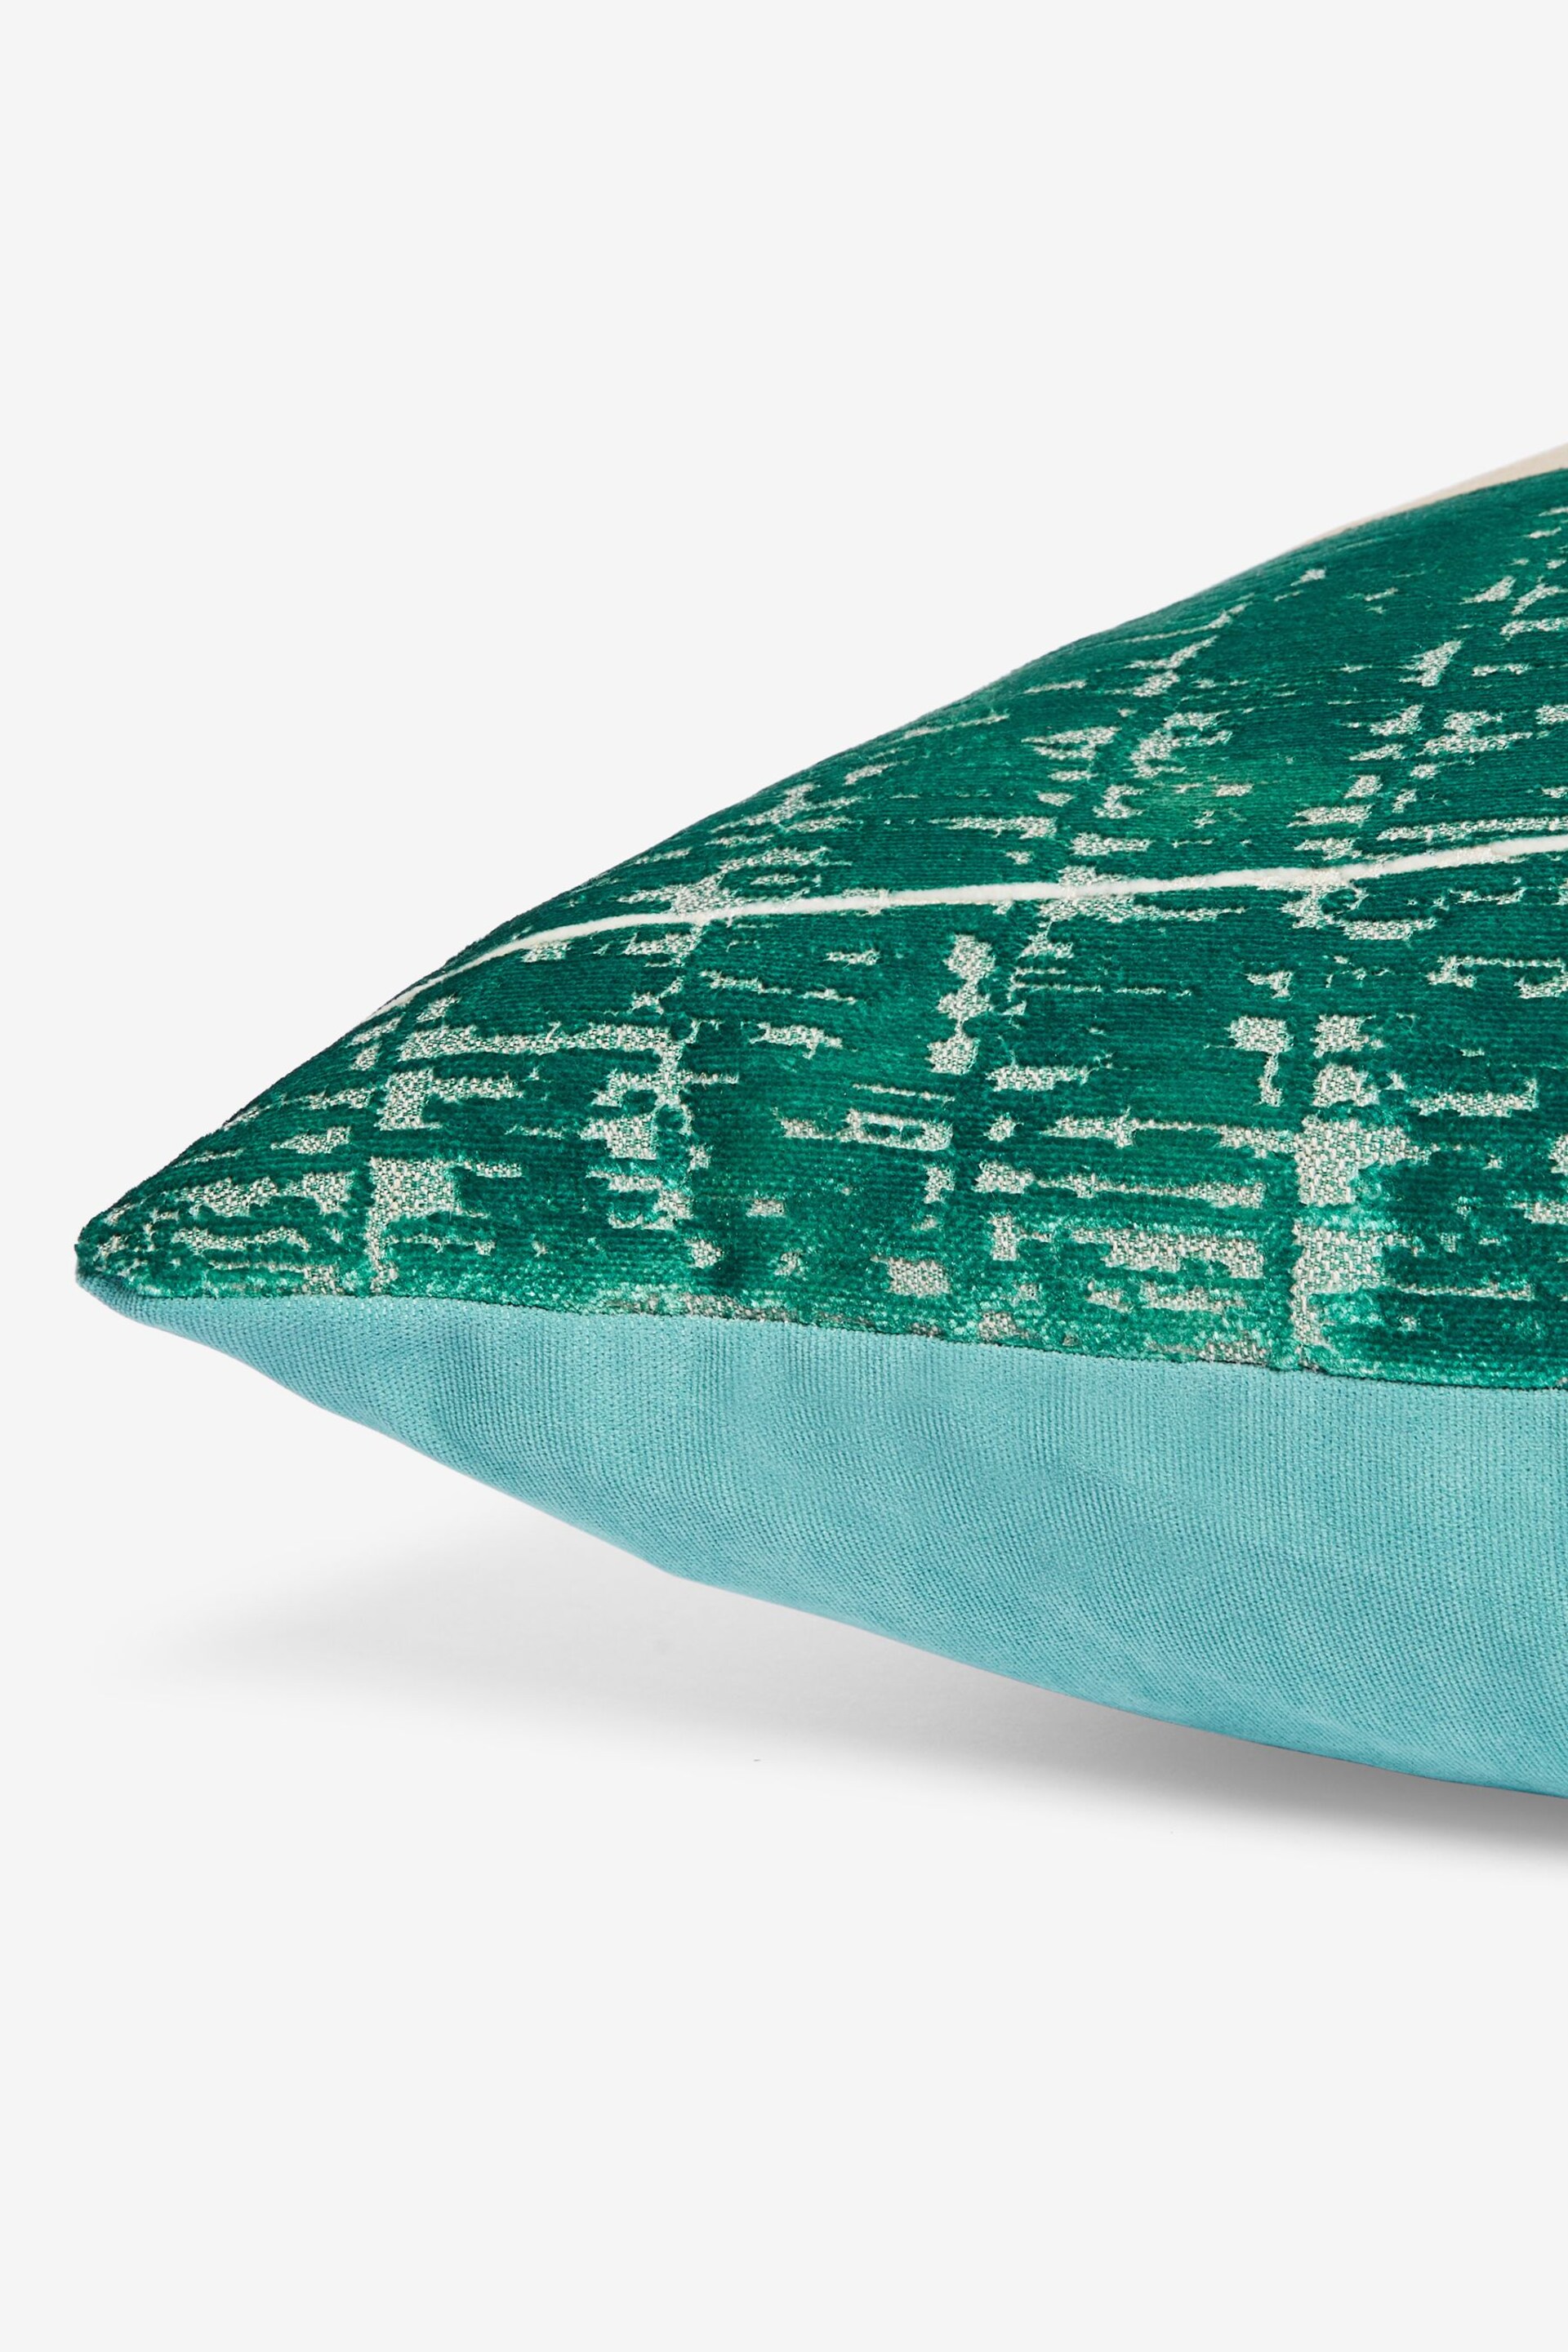 Green 50 x 50cm Abstract Leaf Cushion - Image 5 of 5